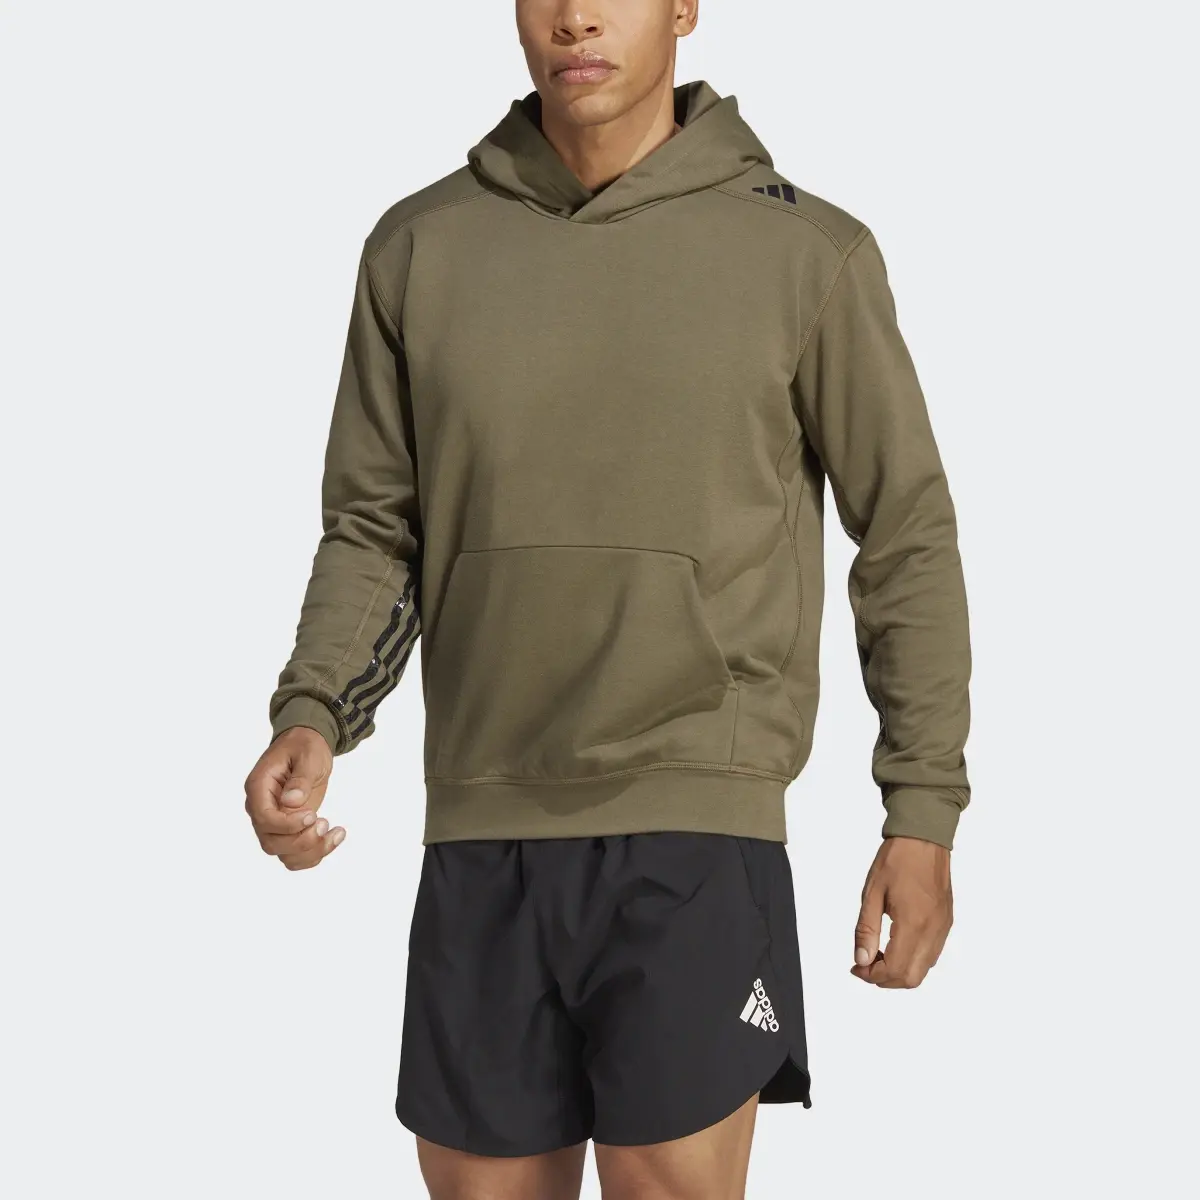 Adidas Curated by Cody Rigsby HIIT Hoodie. 1